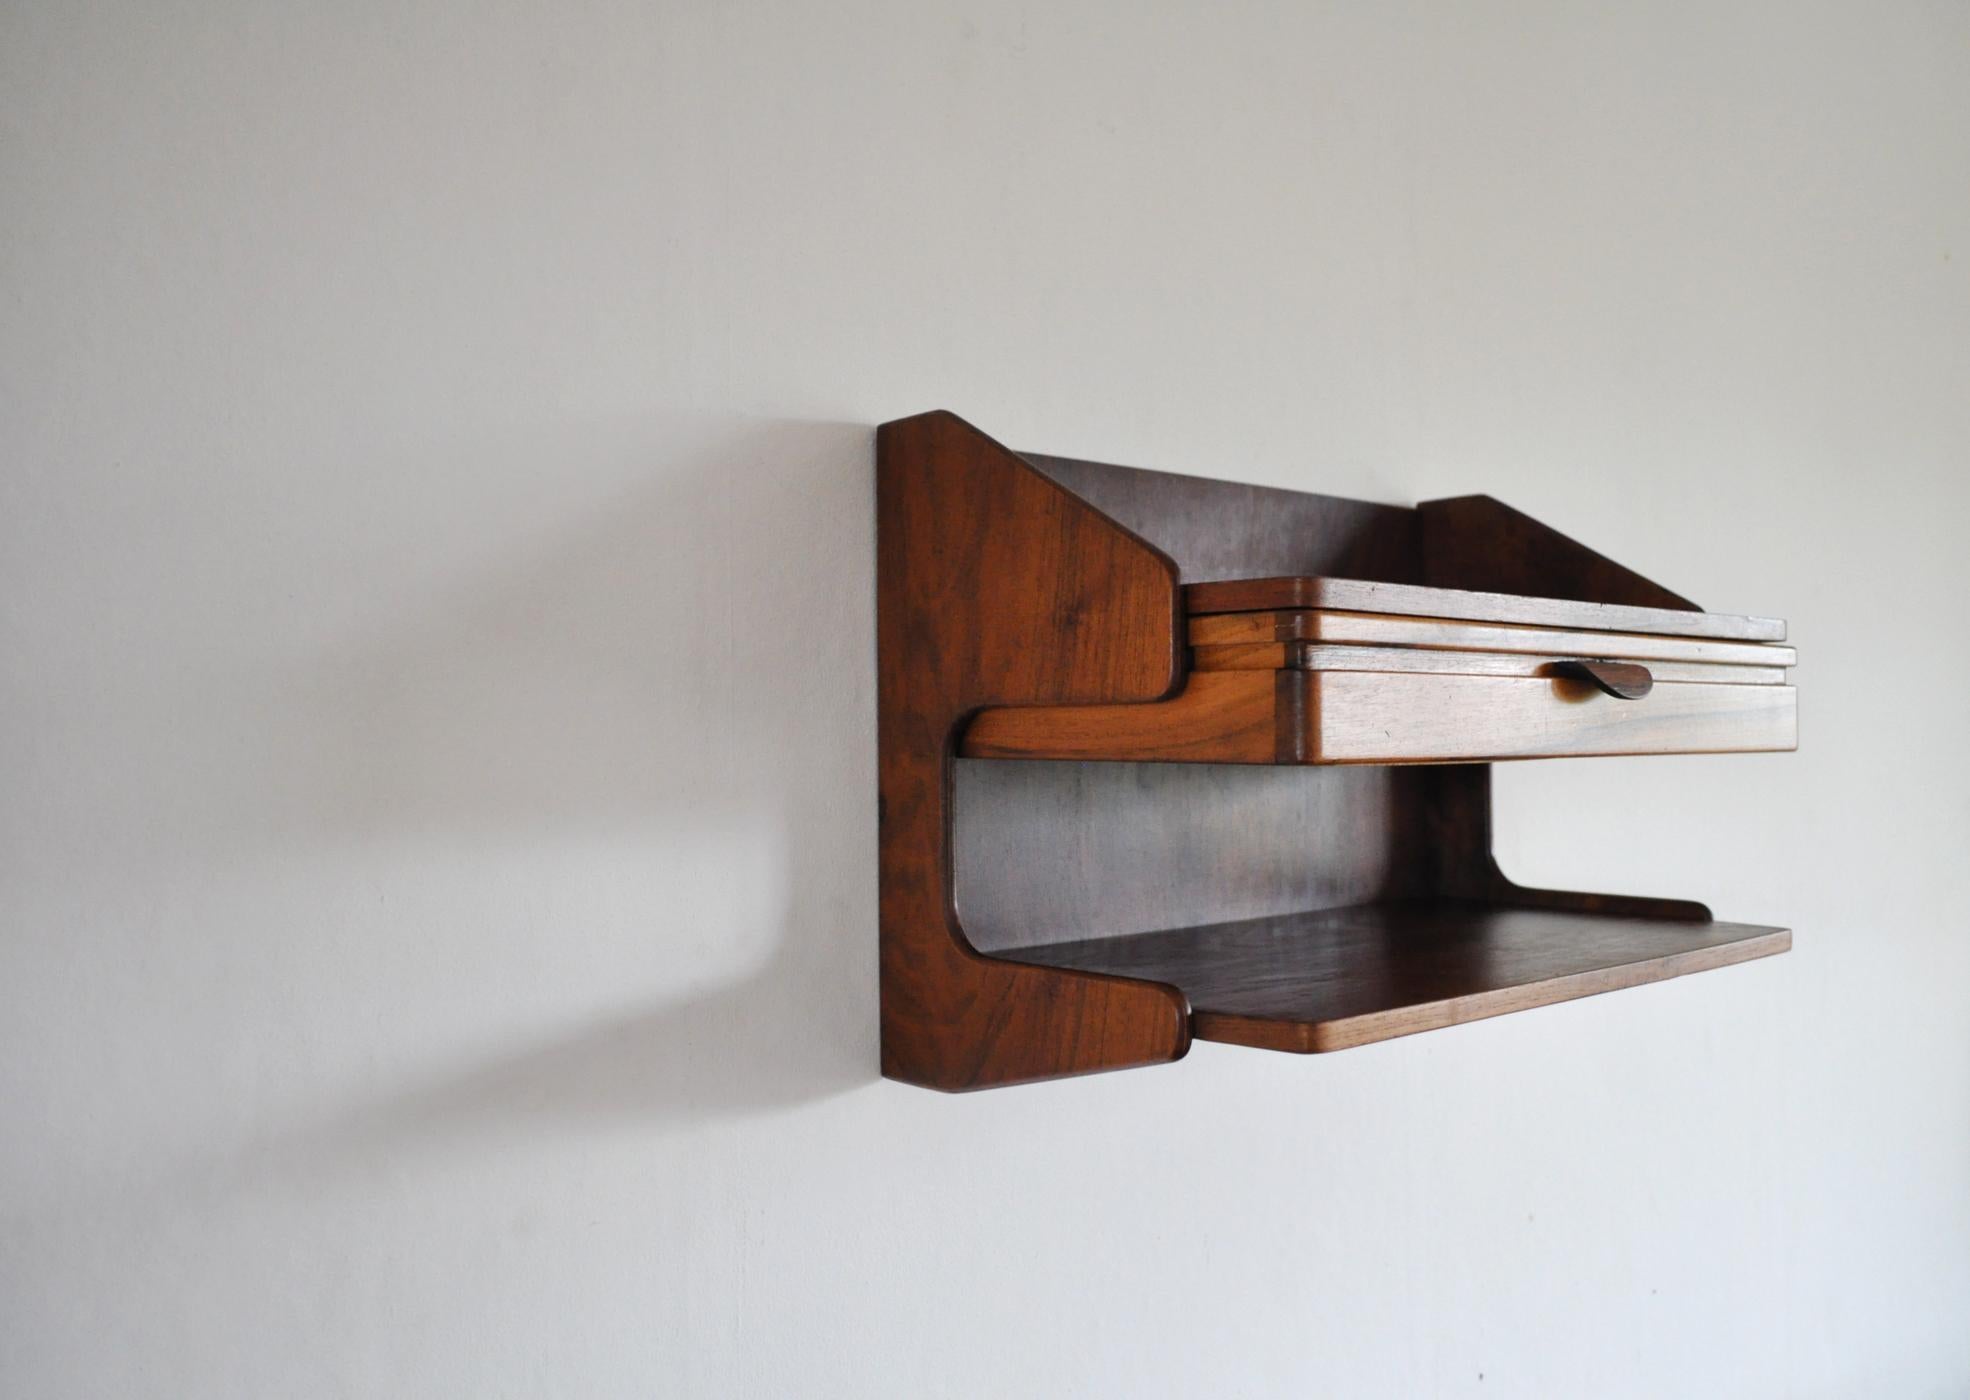 Danish modern wall-mounted storage in teak and rosewood in the style of Hans J. Wegner.
Two shelves and a drawer. 

Signs of wear consistent with age and use.

Dimensions: 
Height 32 cm
Width 46 cm 
Depth 27.5 cm.